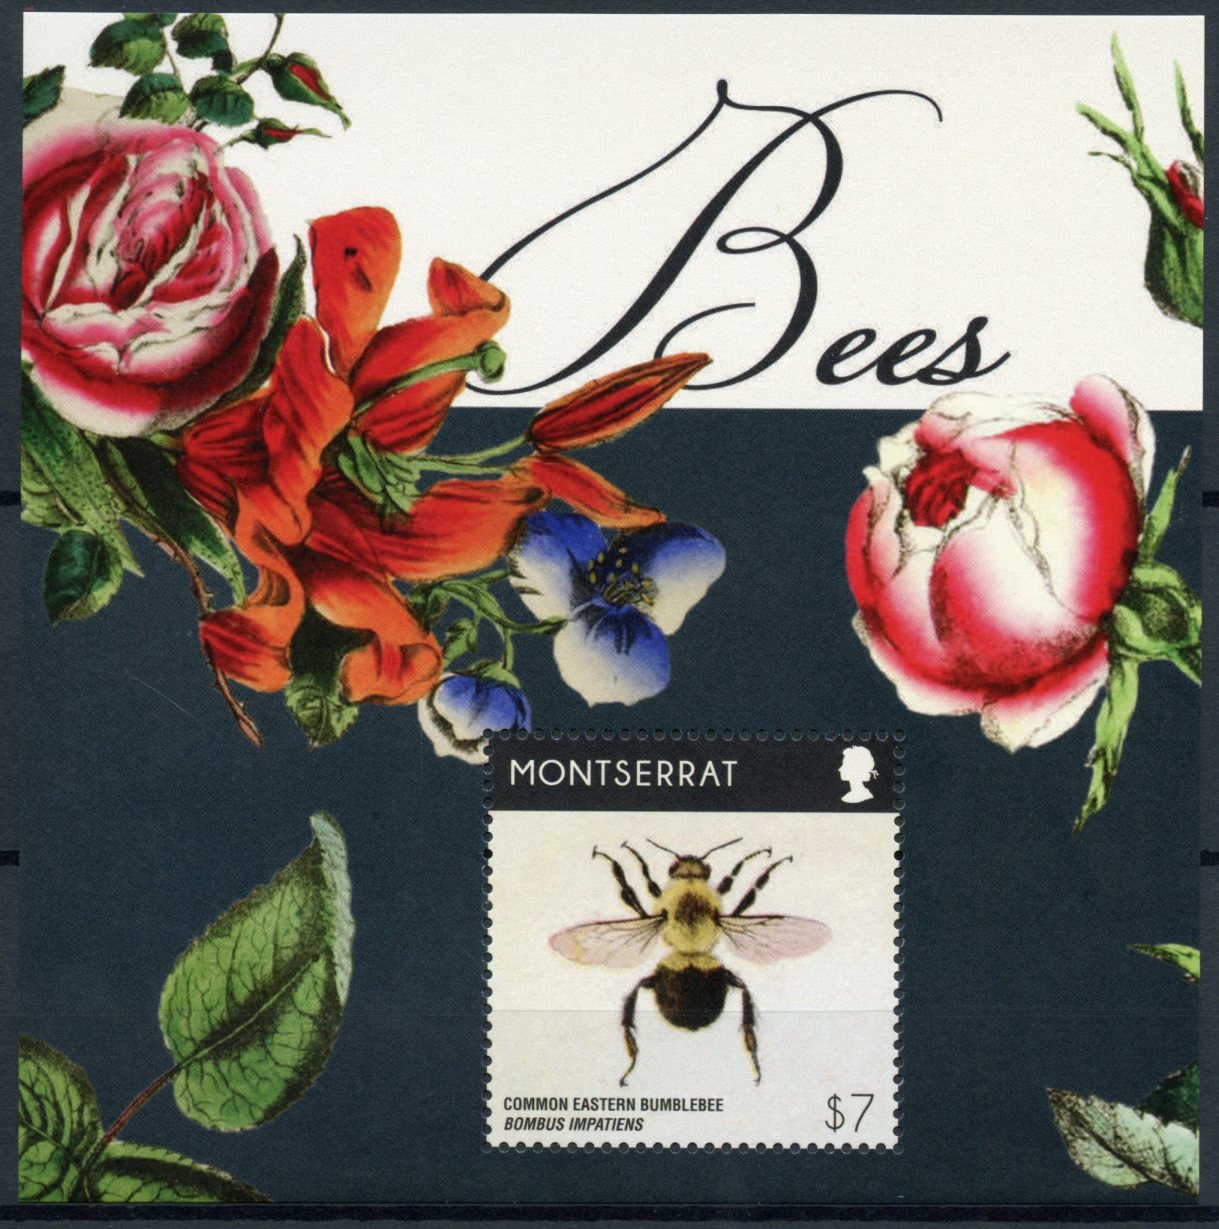 Montserrat 2015 MNH Bees 1v S/S Insects Common Eastern Bumblebee